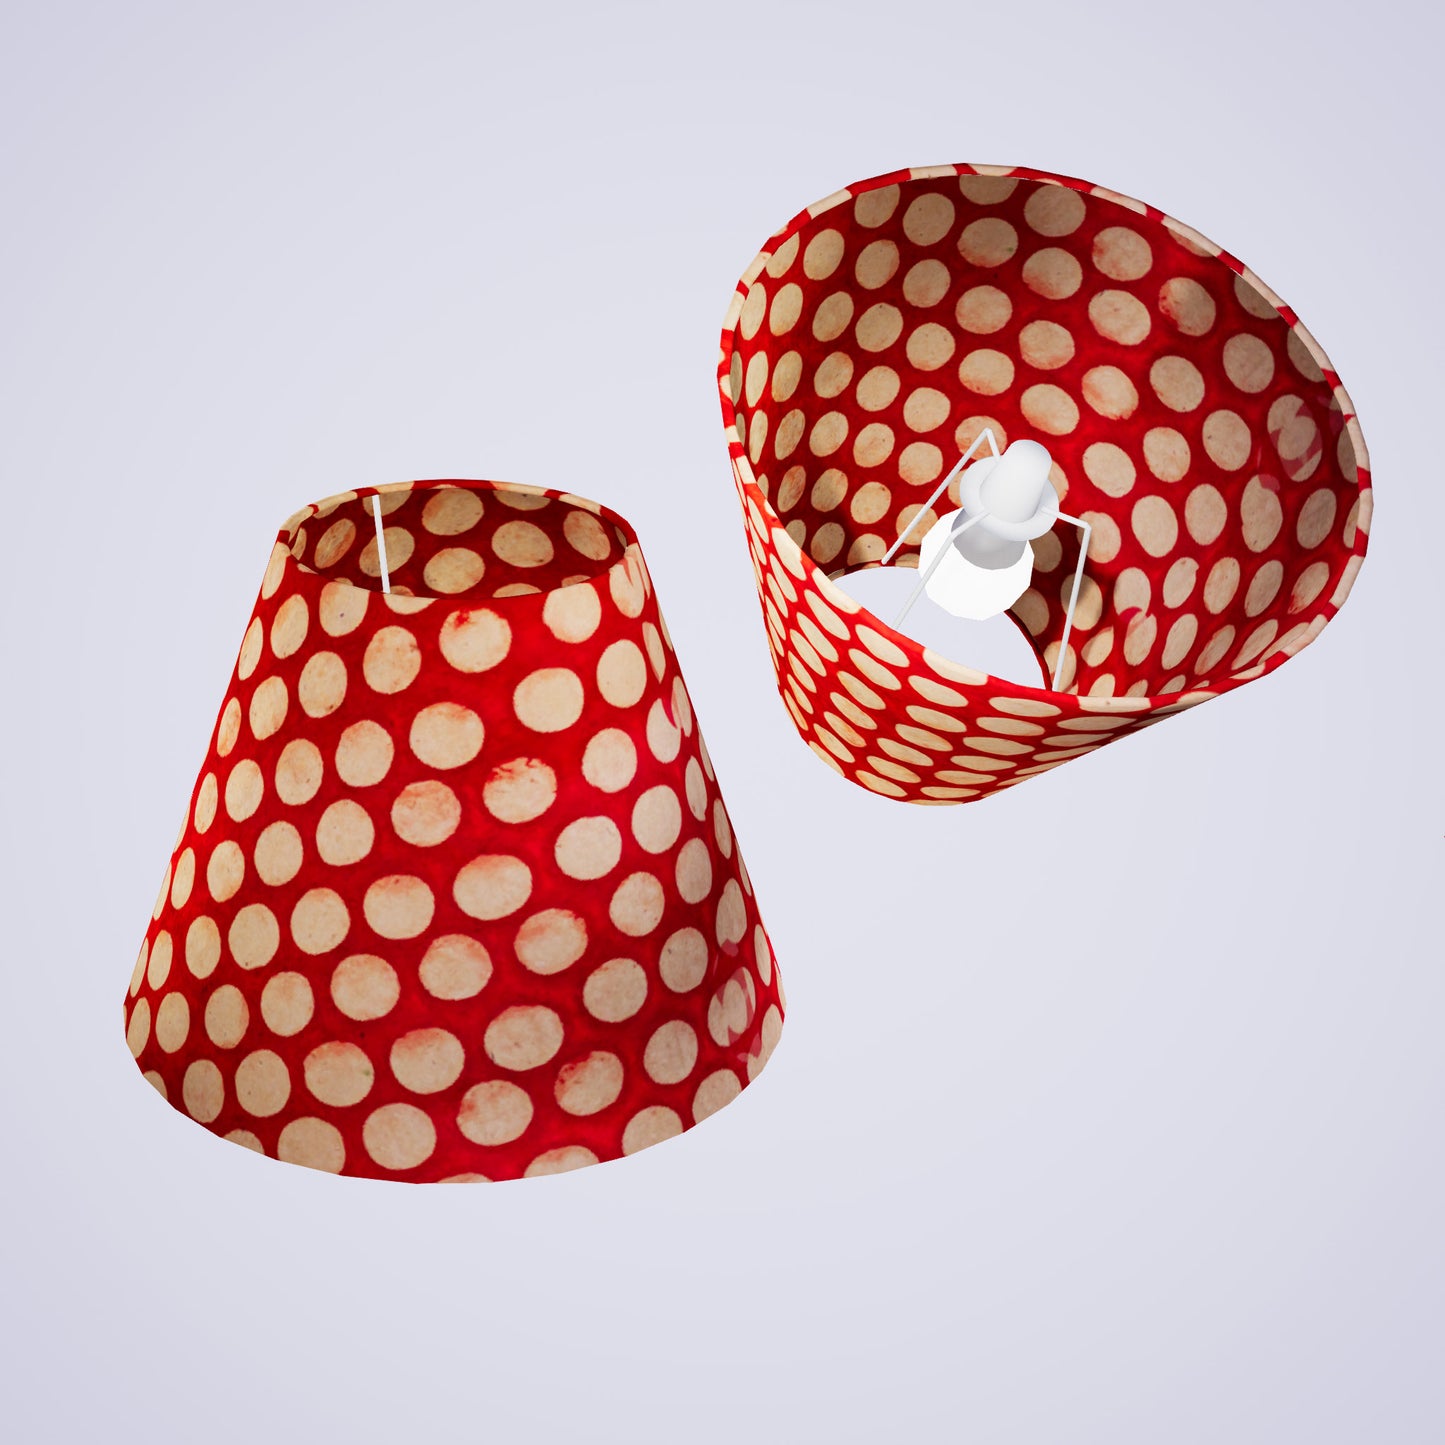 Conical Lamp Shade P84 - Batik Dots on Red, 15cm(top) x 30cm(bottom) x 22cm(height)